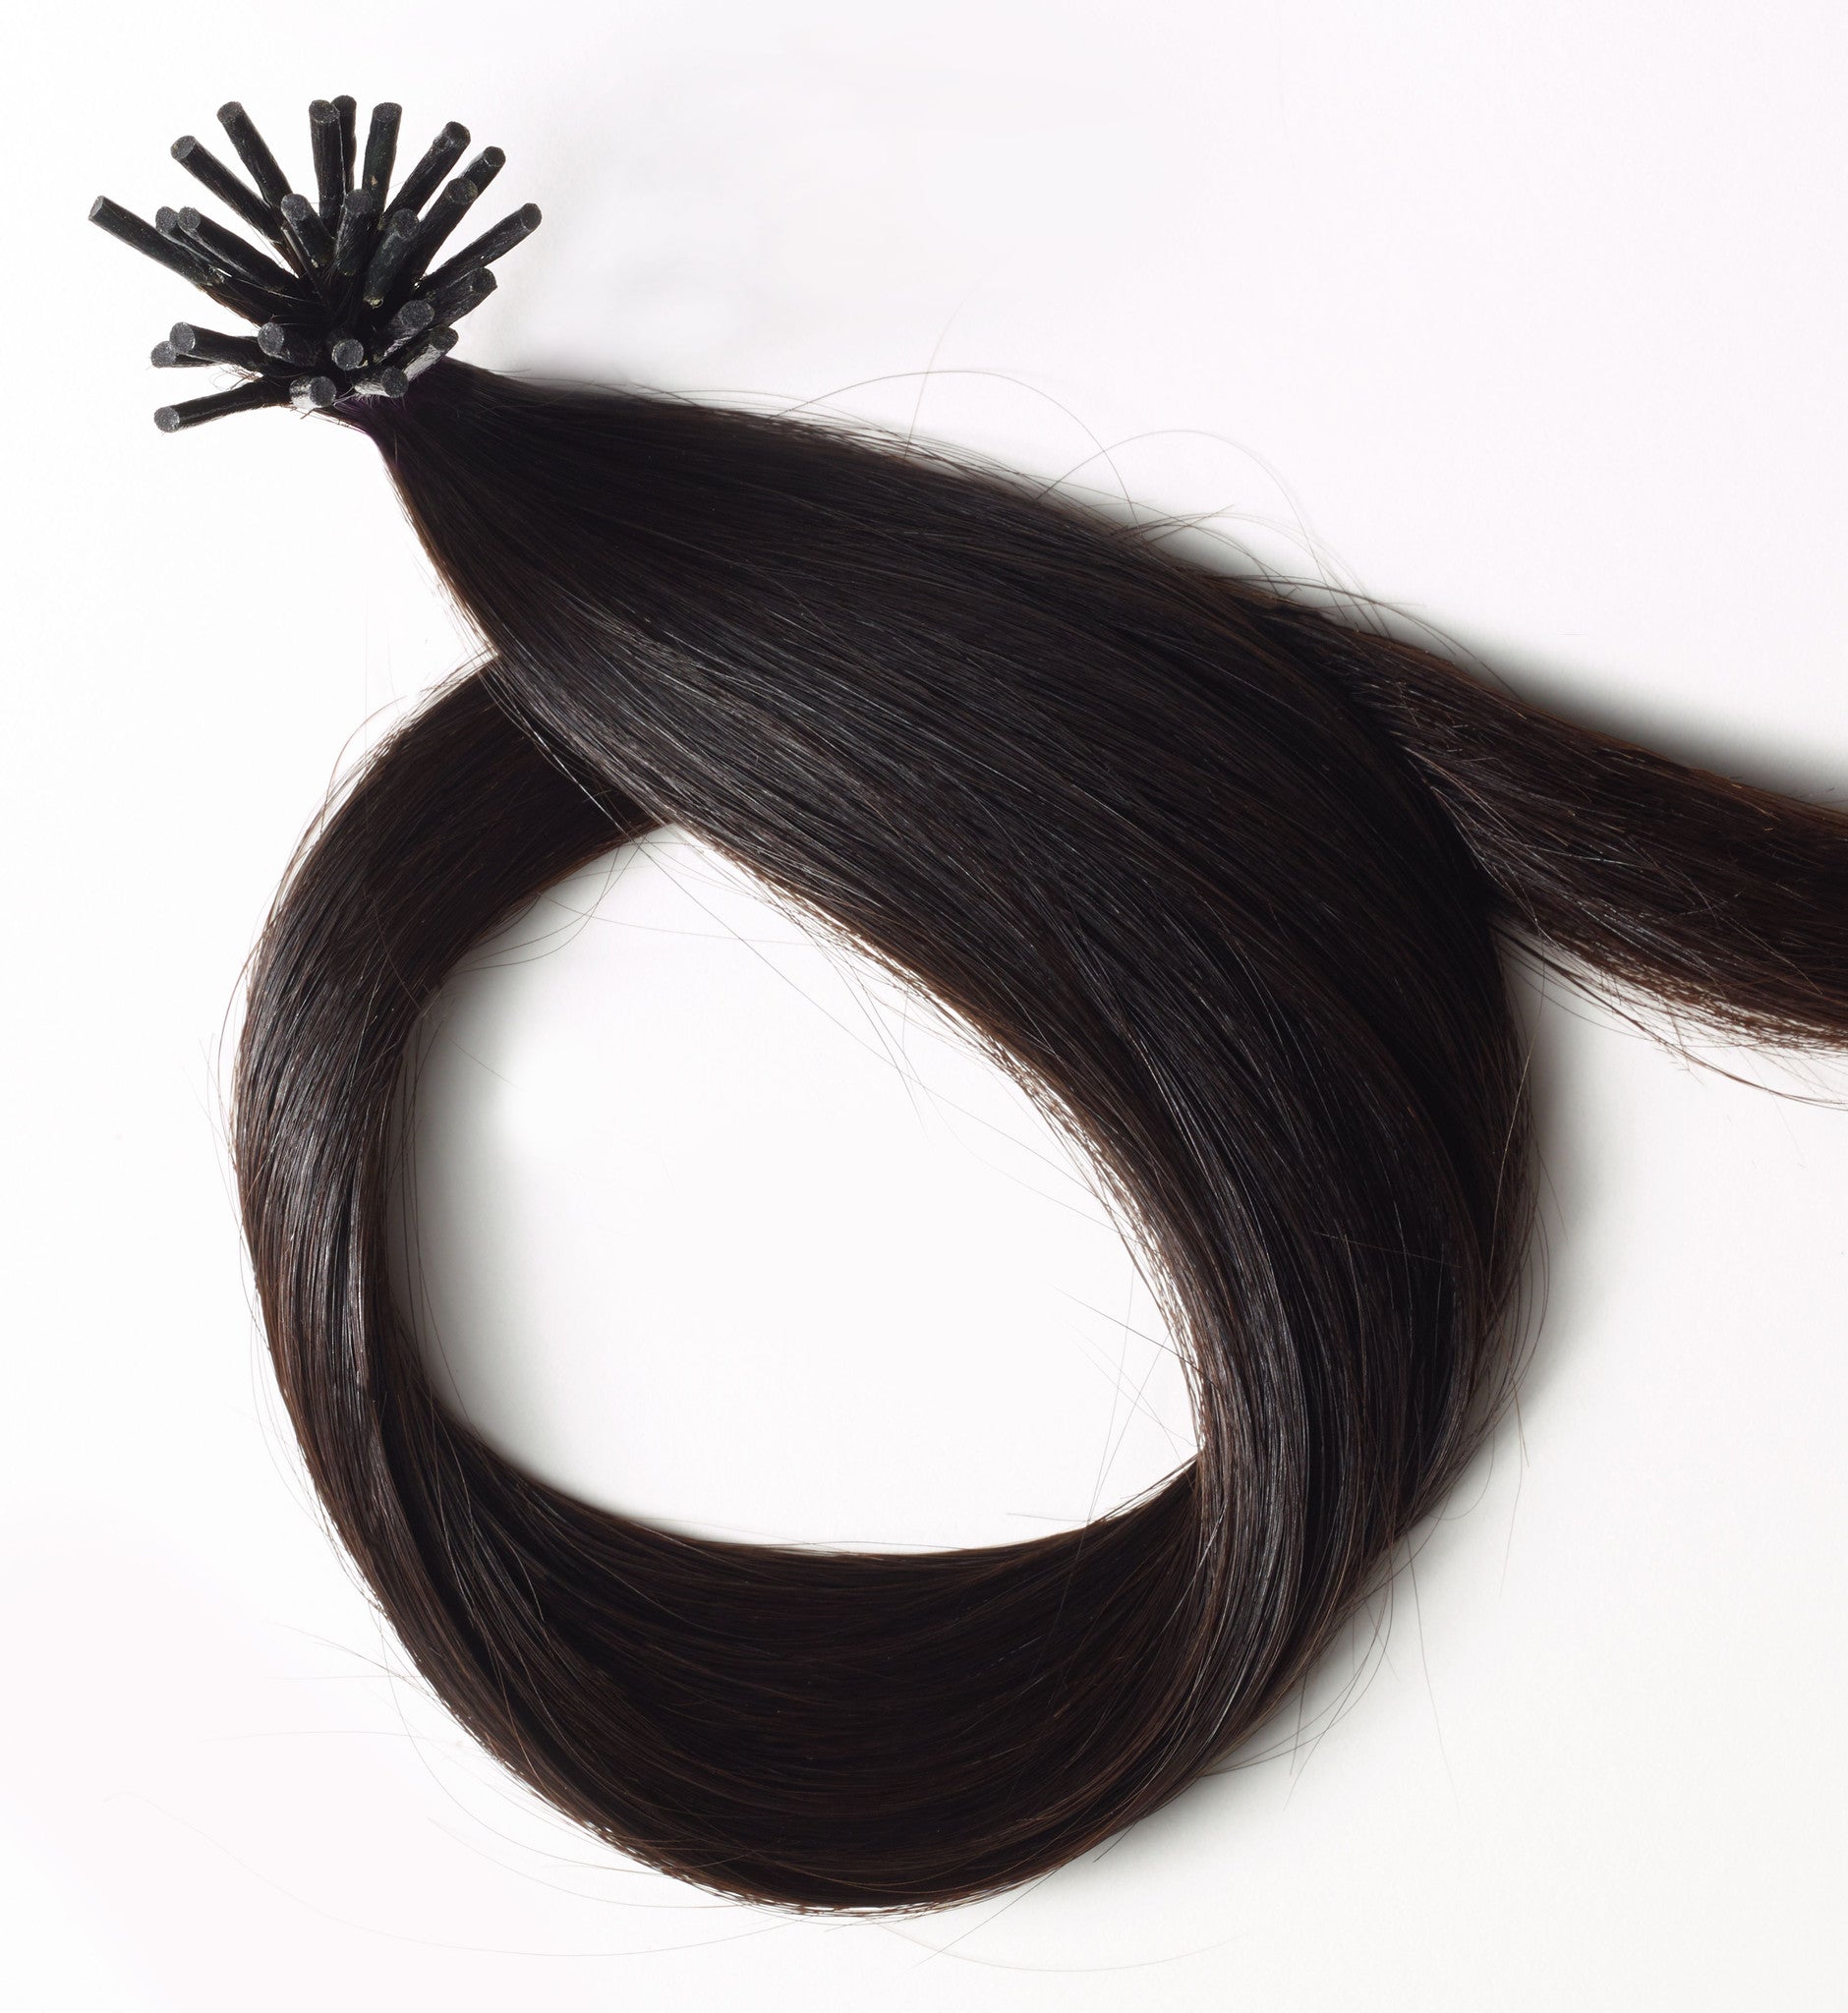 How to Care for Your Fusion Hair Extensions